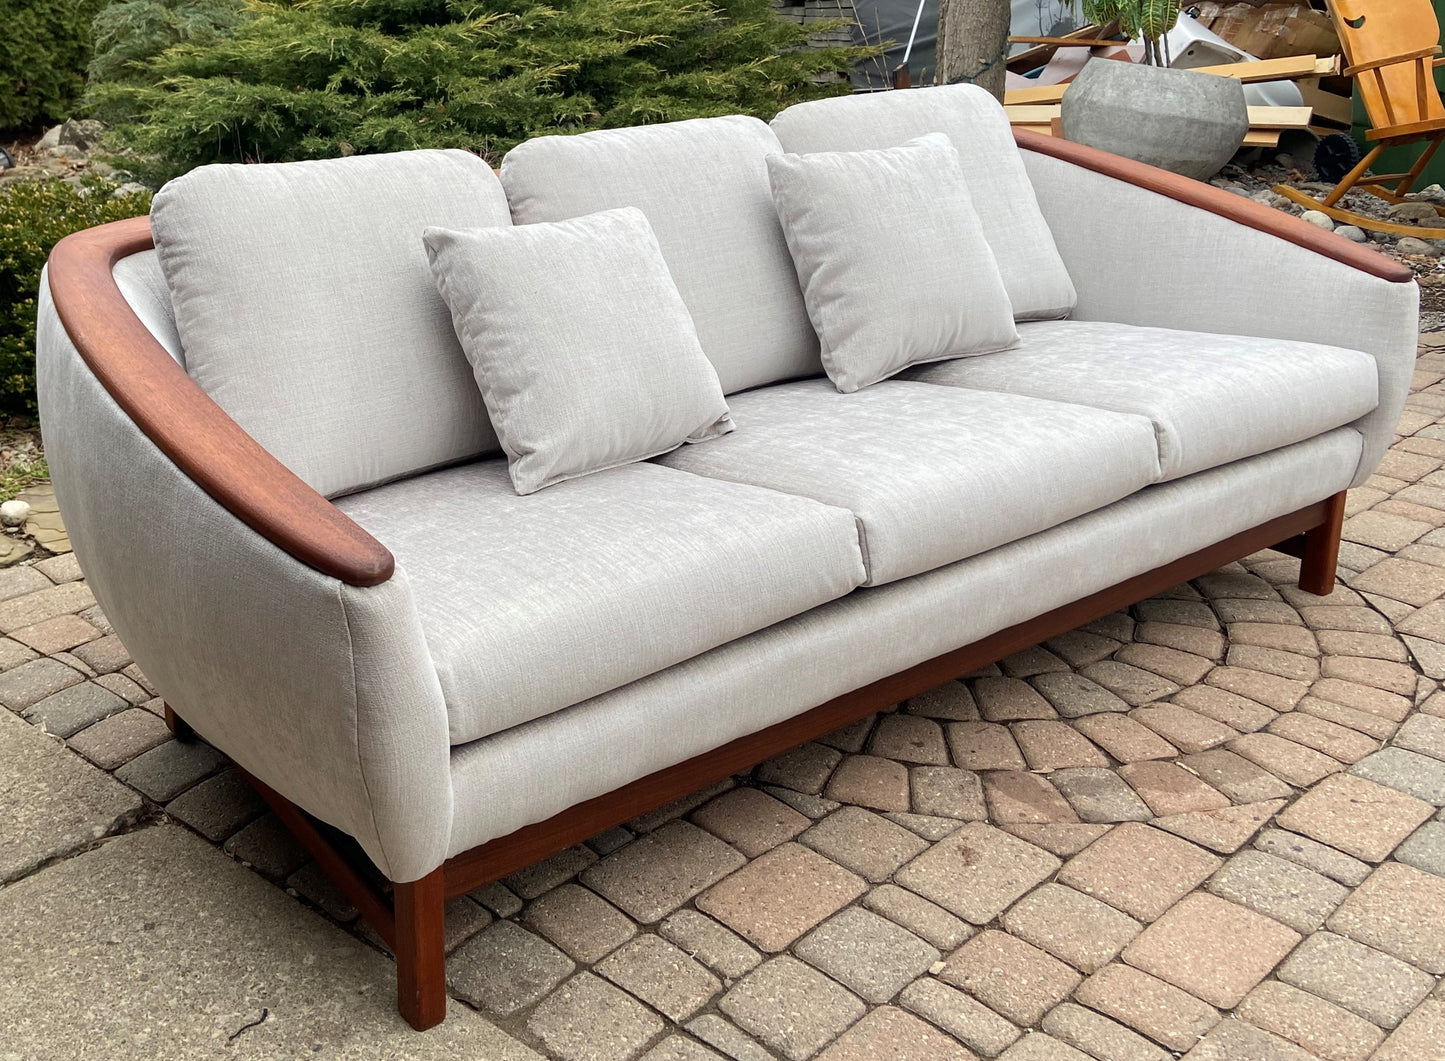 MCM Huber Barrel Back Teak Sofa, REFINISHED & REUPHOLSTERED in KNOLL stain repellent fabric, PERFECT